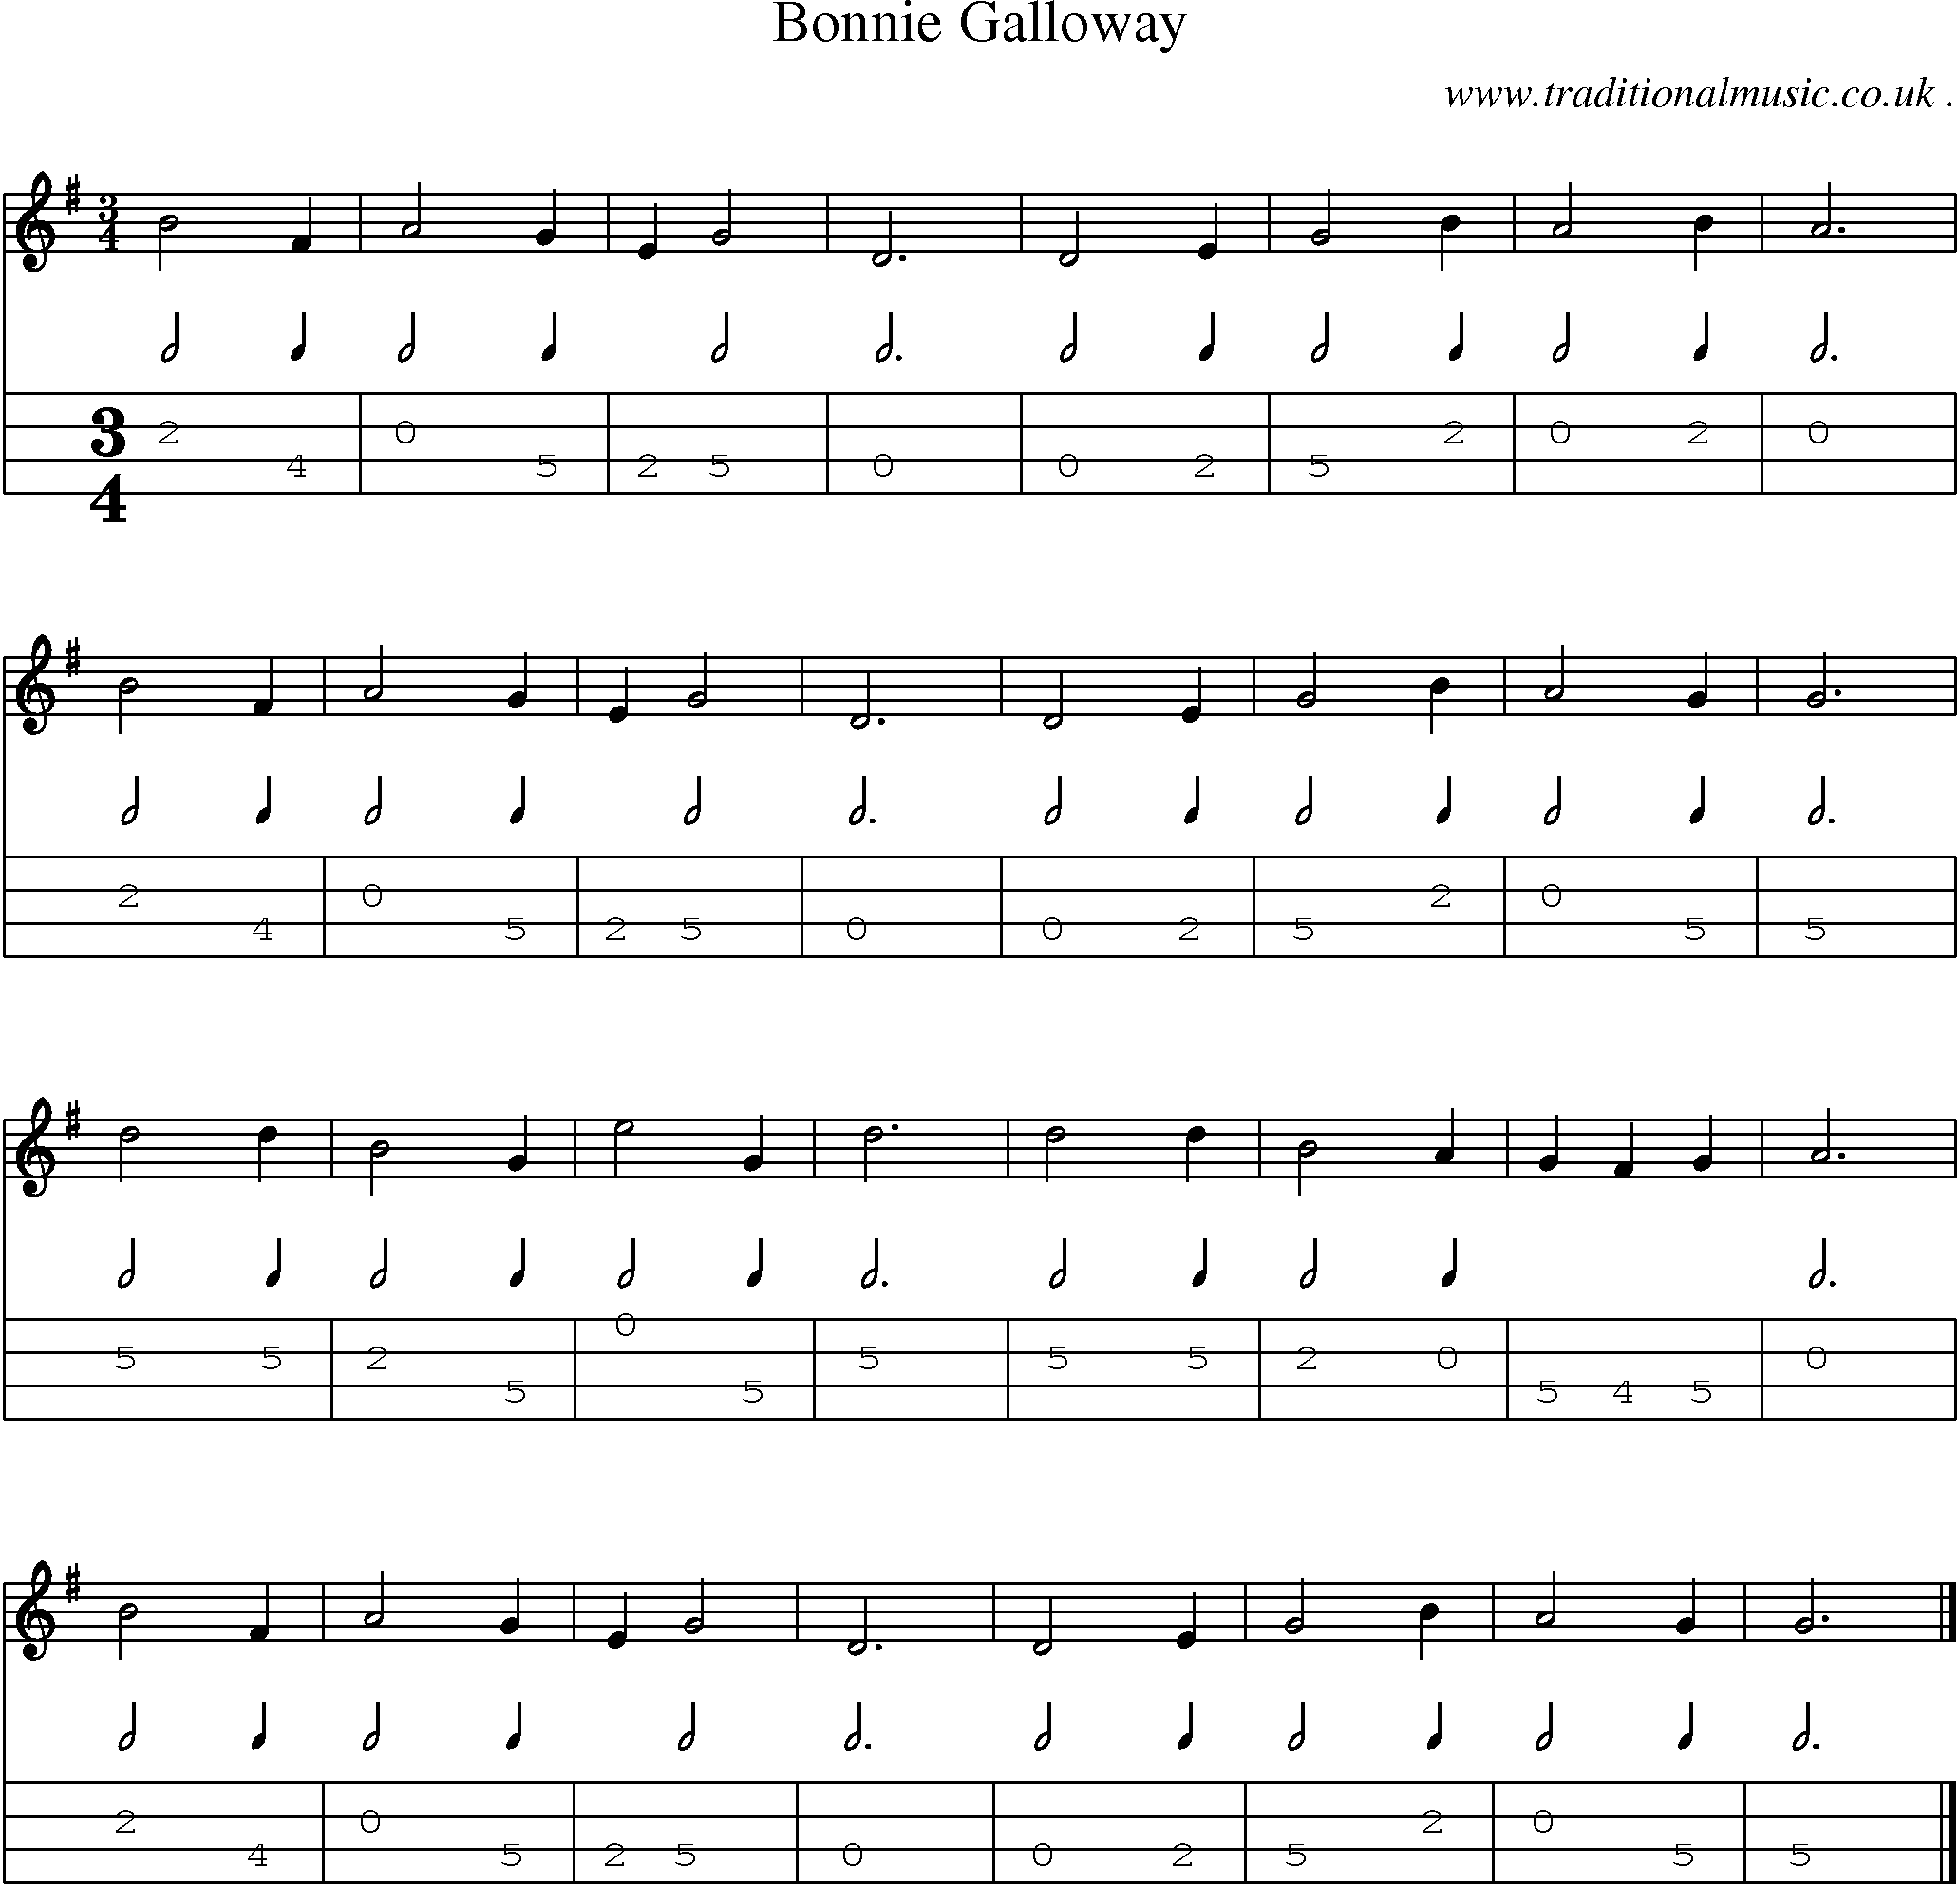 Sheet-music  score, Chords and Mandolin Tabs for Bonnie Galloway